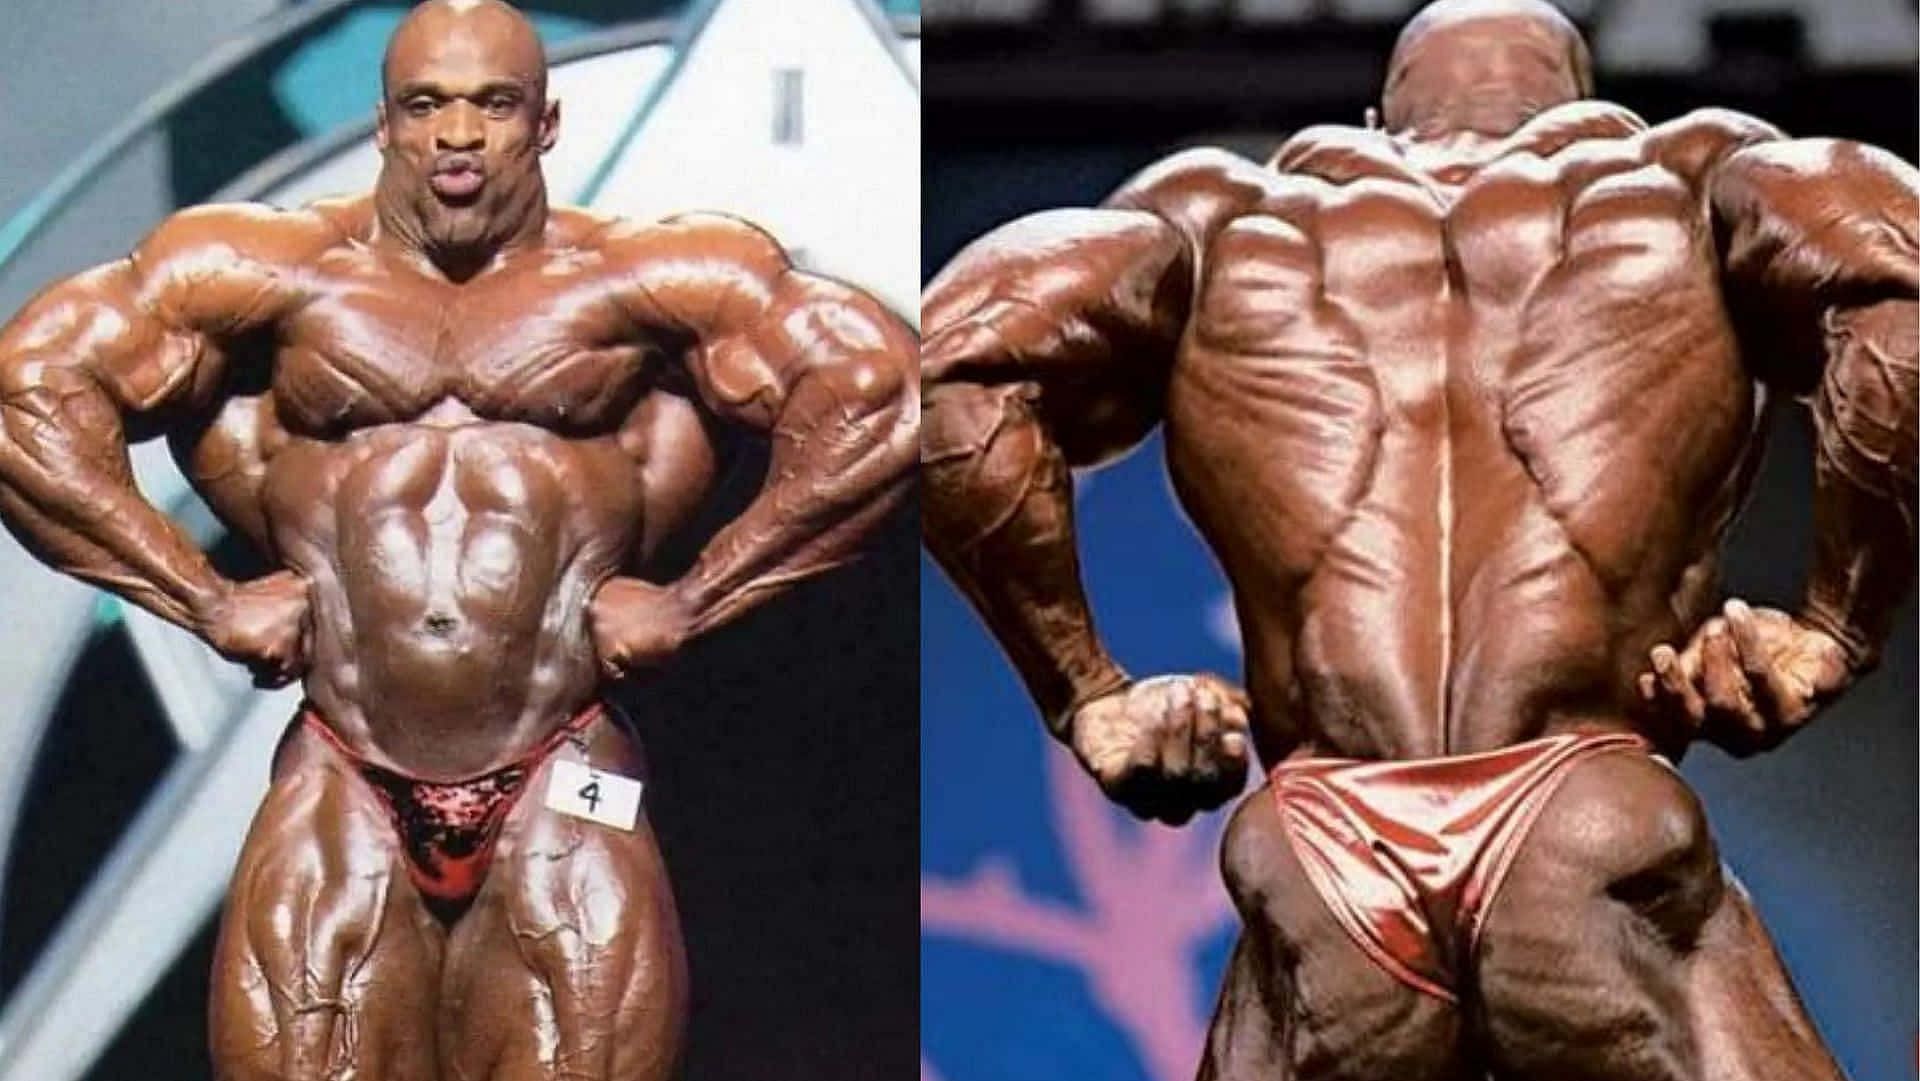 Ronnie Coleman will forever be one of the biggest names in the world of bodybuilding. (Image via Wallpapers.com/ Prentice)